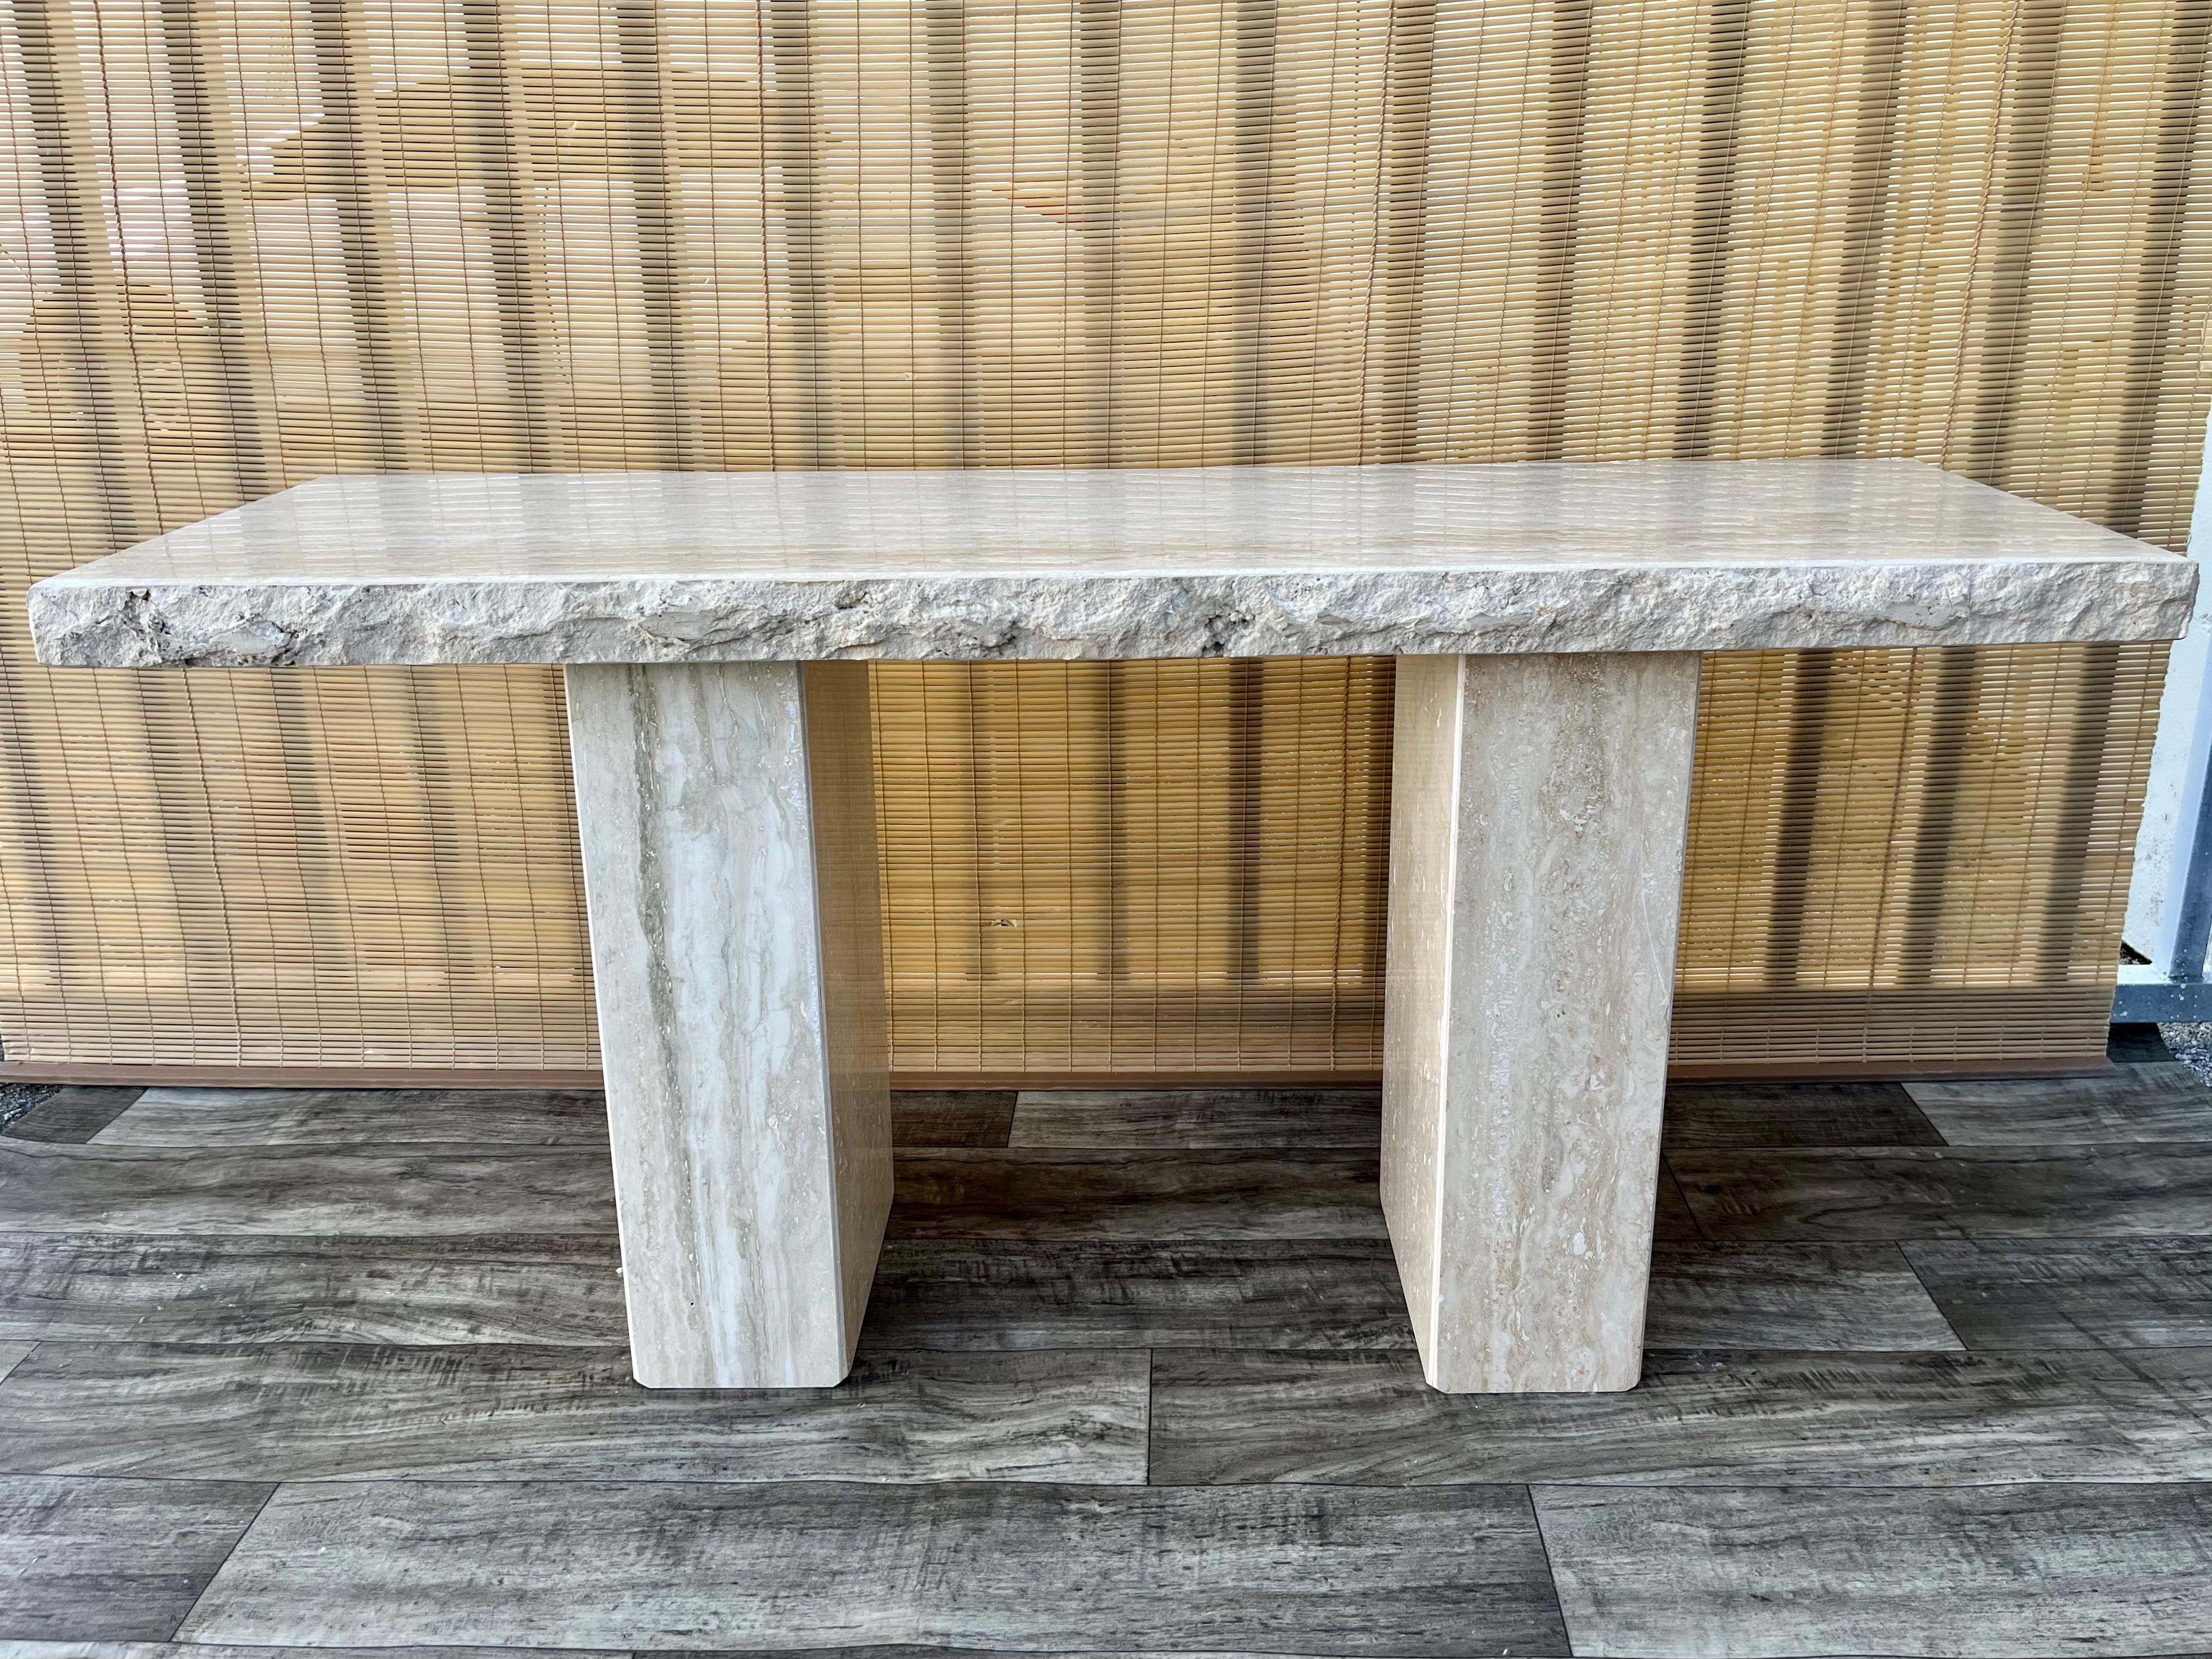 Late 20th Century Post Modern Live Edge Travertine Console Table by Stone International Italy.
Features 
Features a minimalist design with a light tan polished travertine stone, with beautiful natural stone veins and grain, raw edges and supported